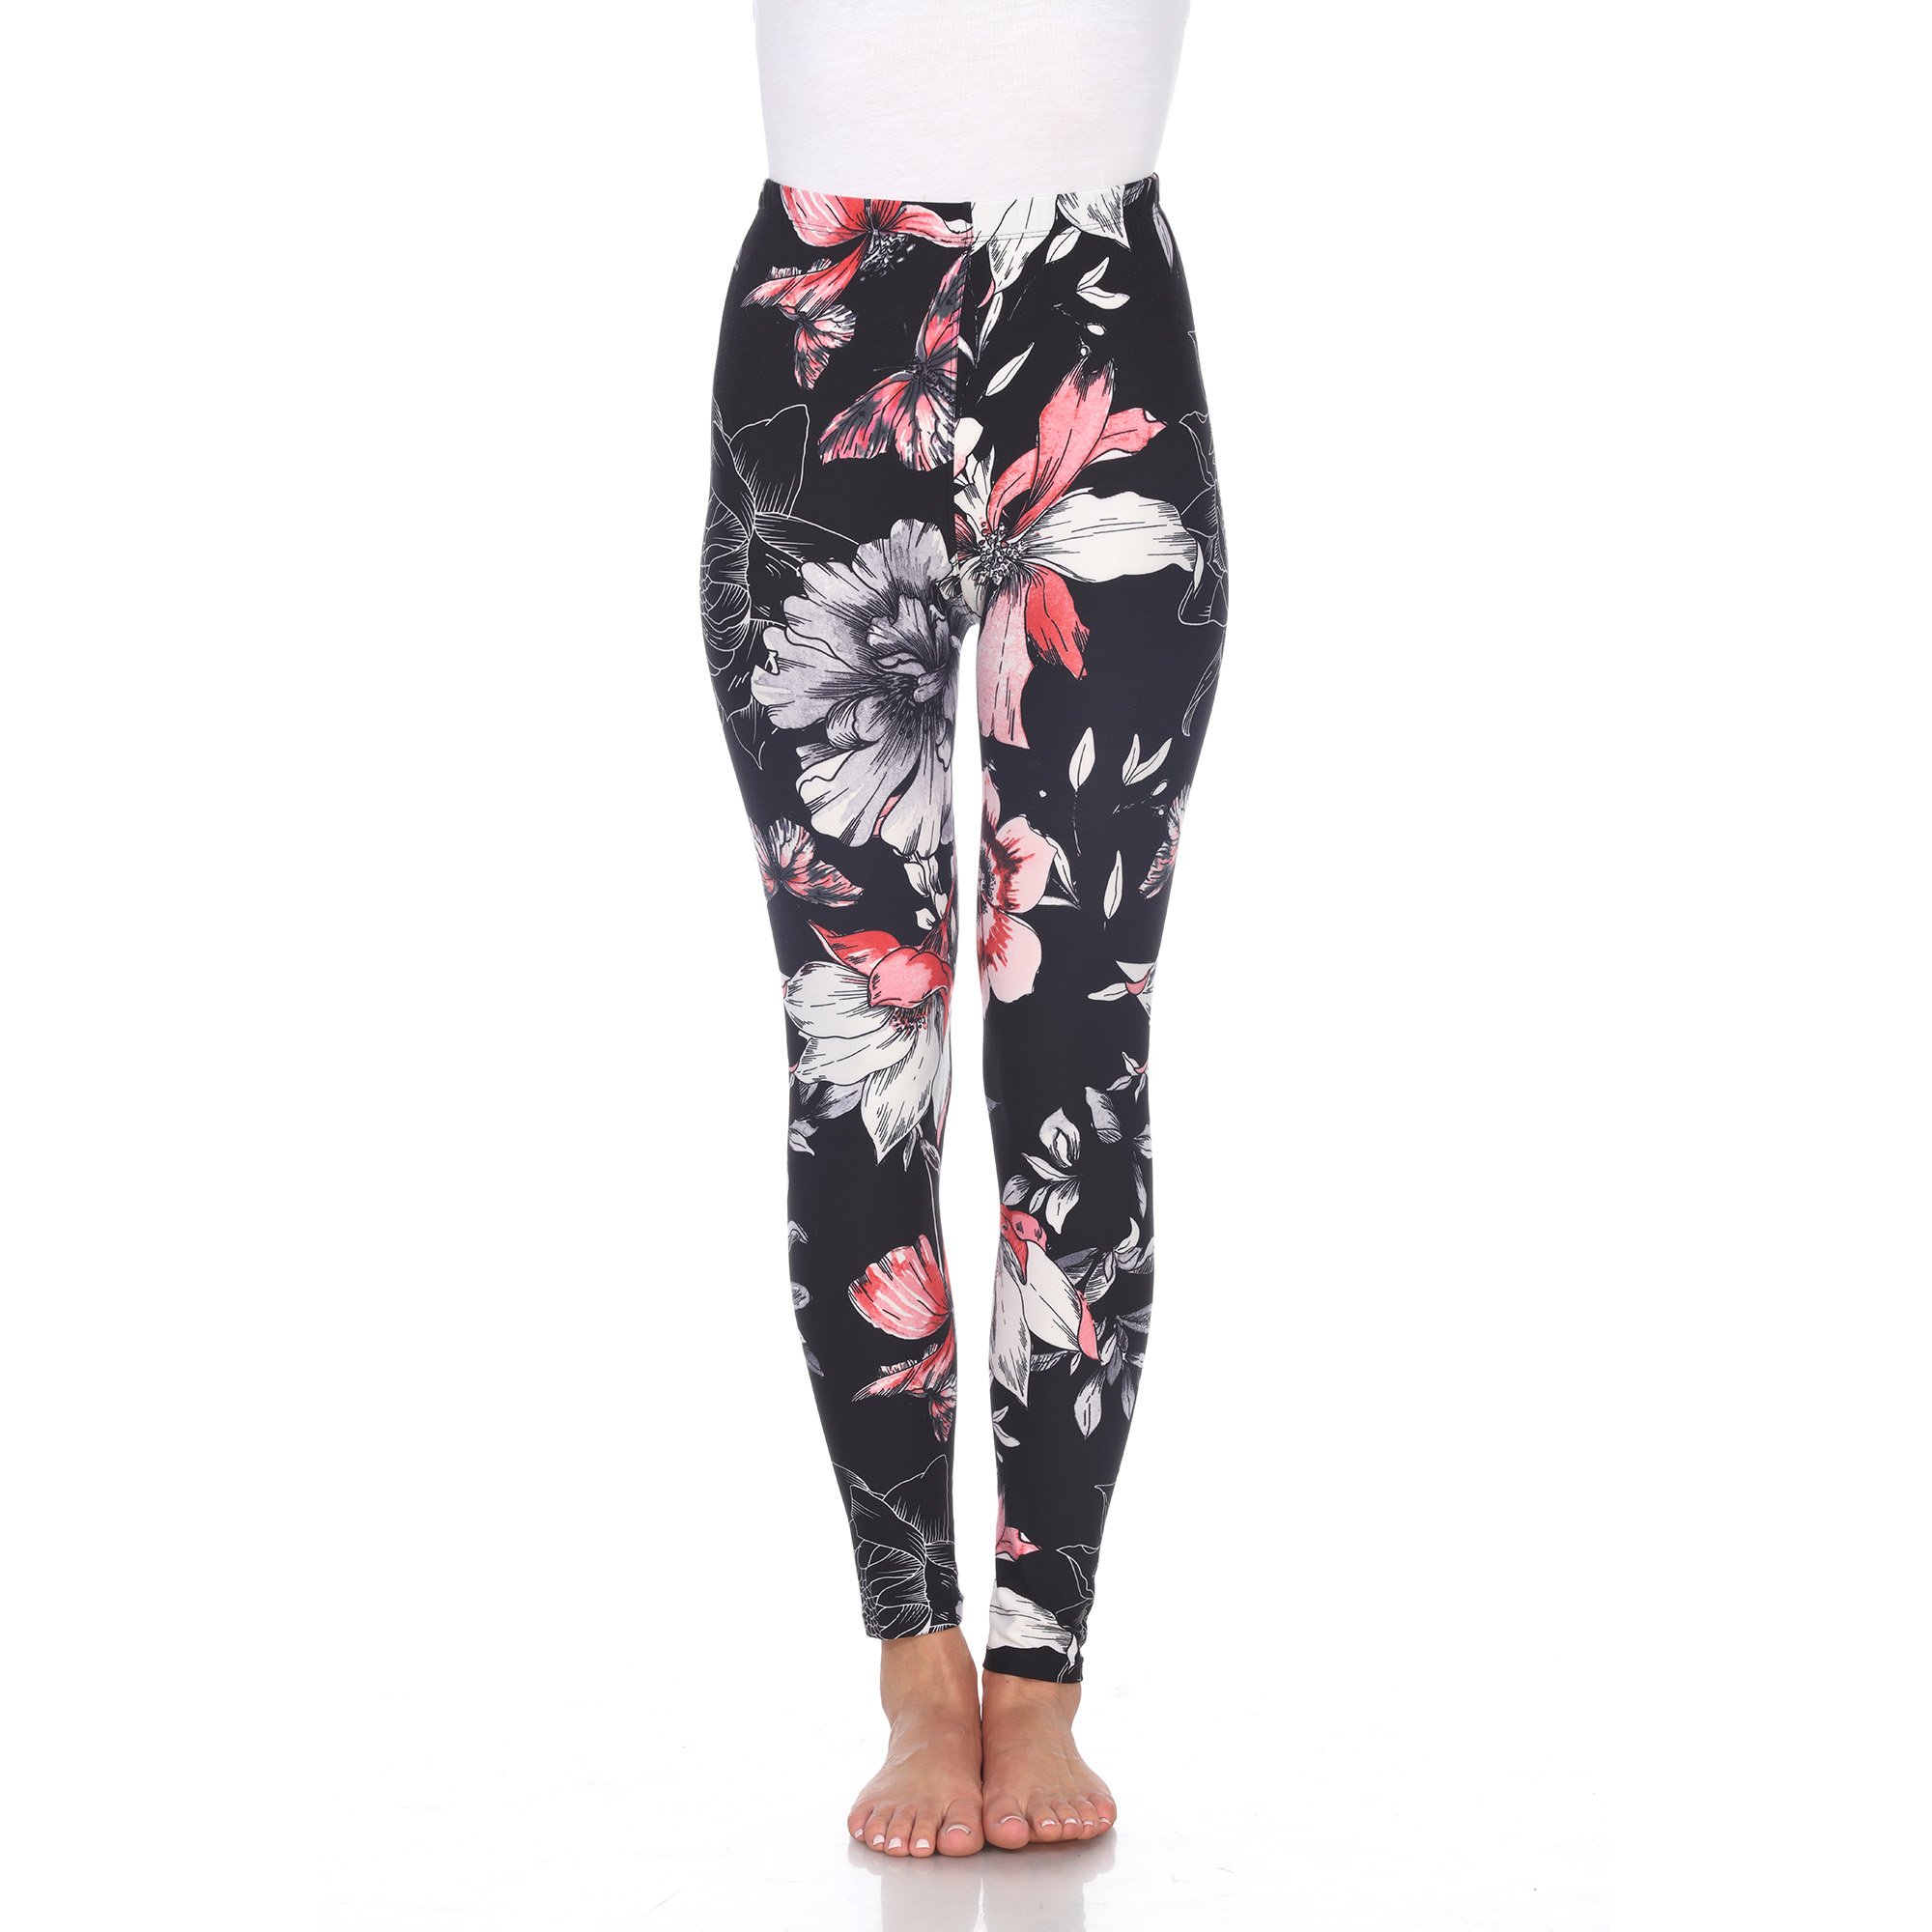 White Mark Women's Paisley Print Stretch Leggings - Colorful Paisley, One Size